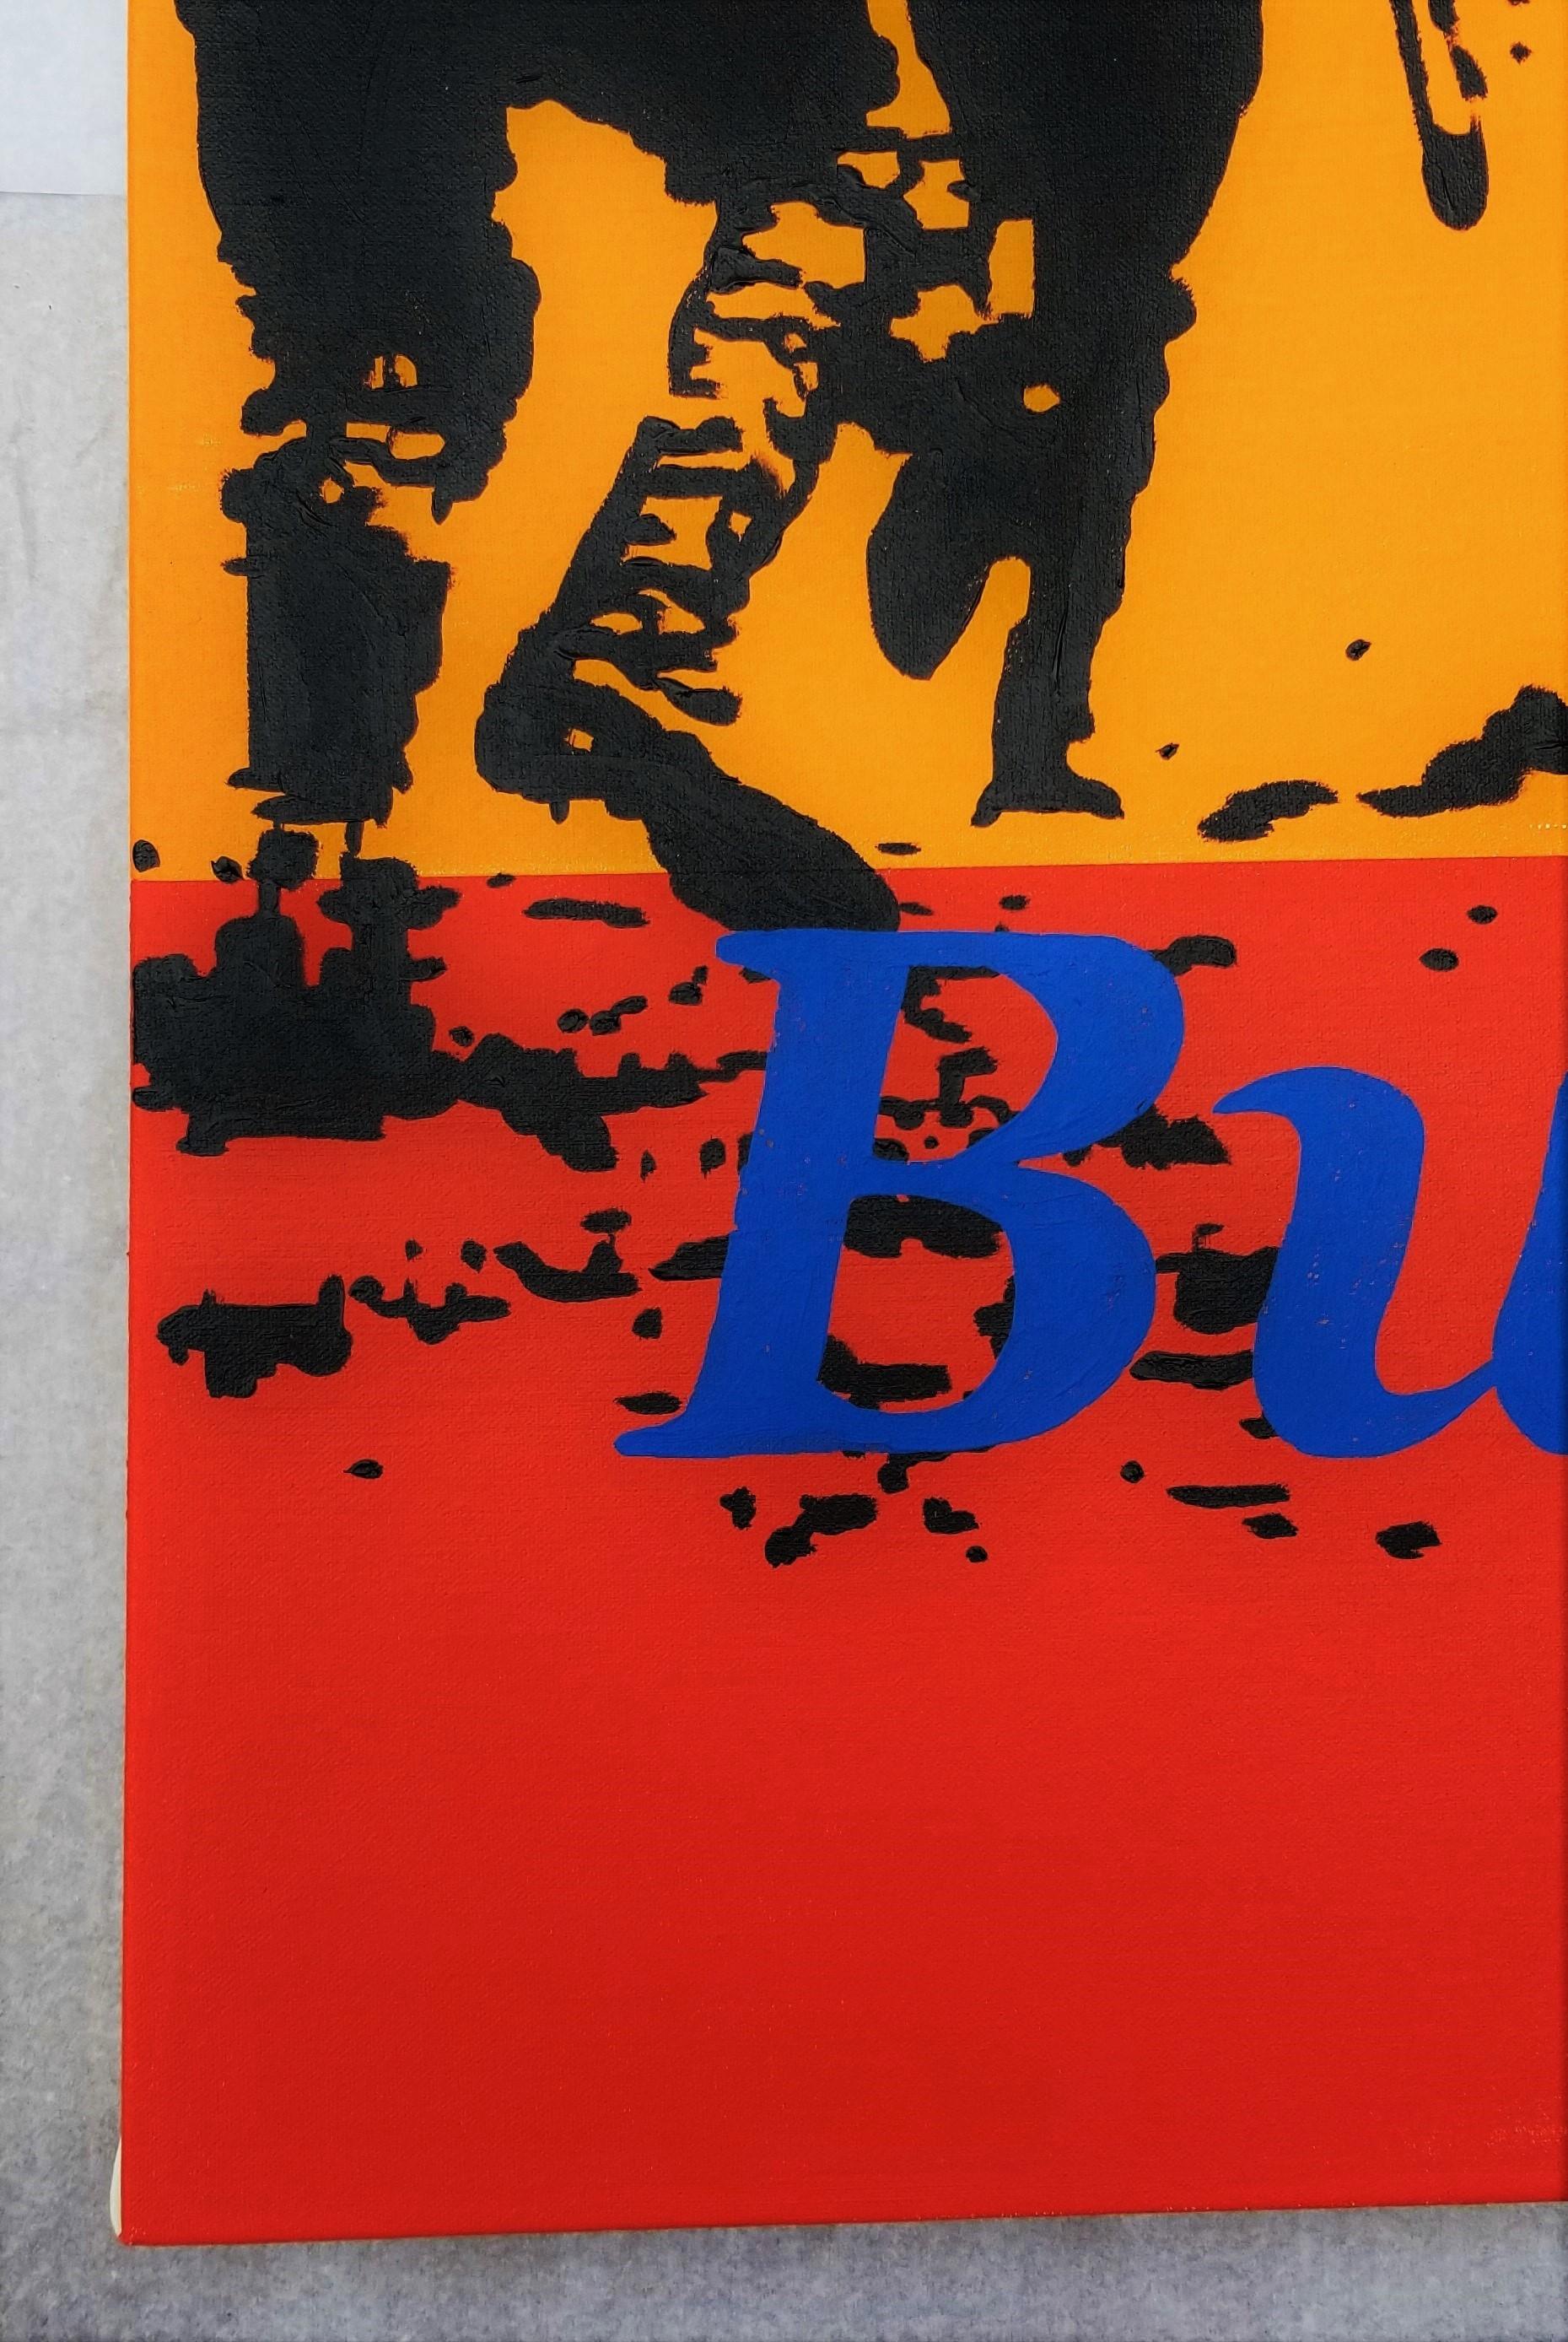 It's Good Business! /// Contemporary Street Art Text War Political Painting - Red Abstract Painting by Jack Graves III